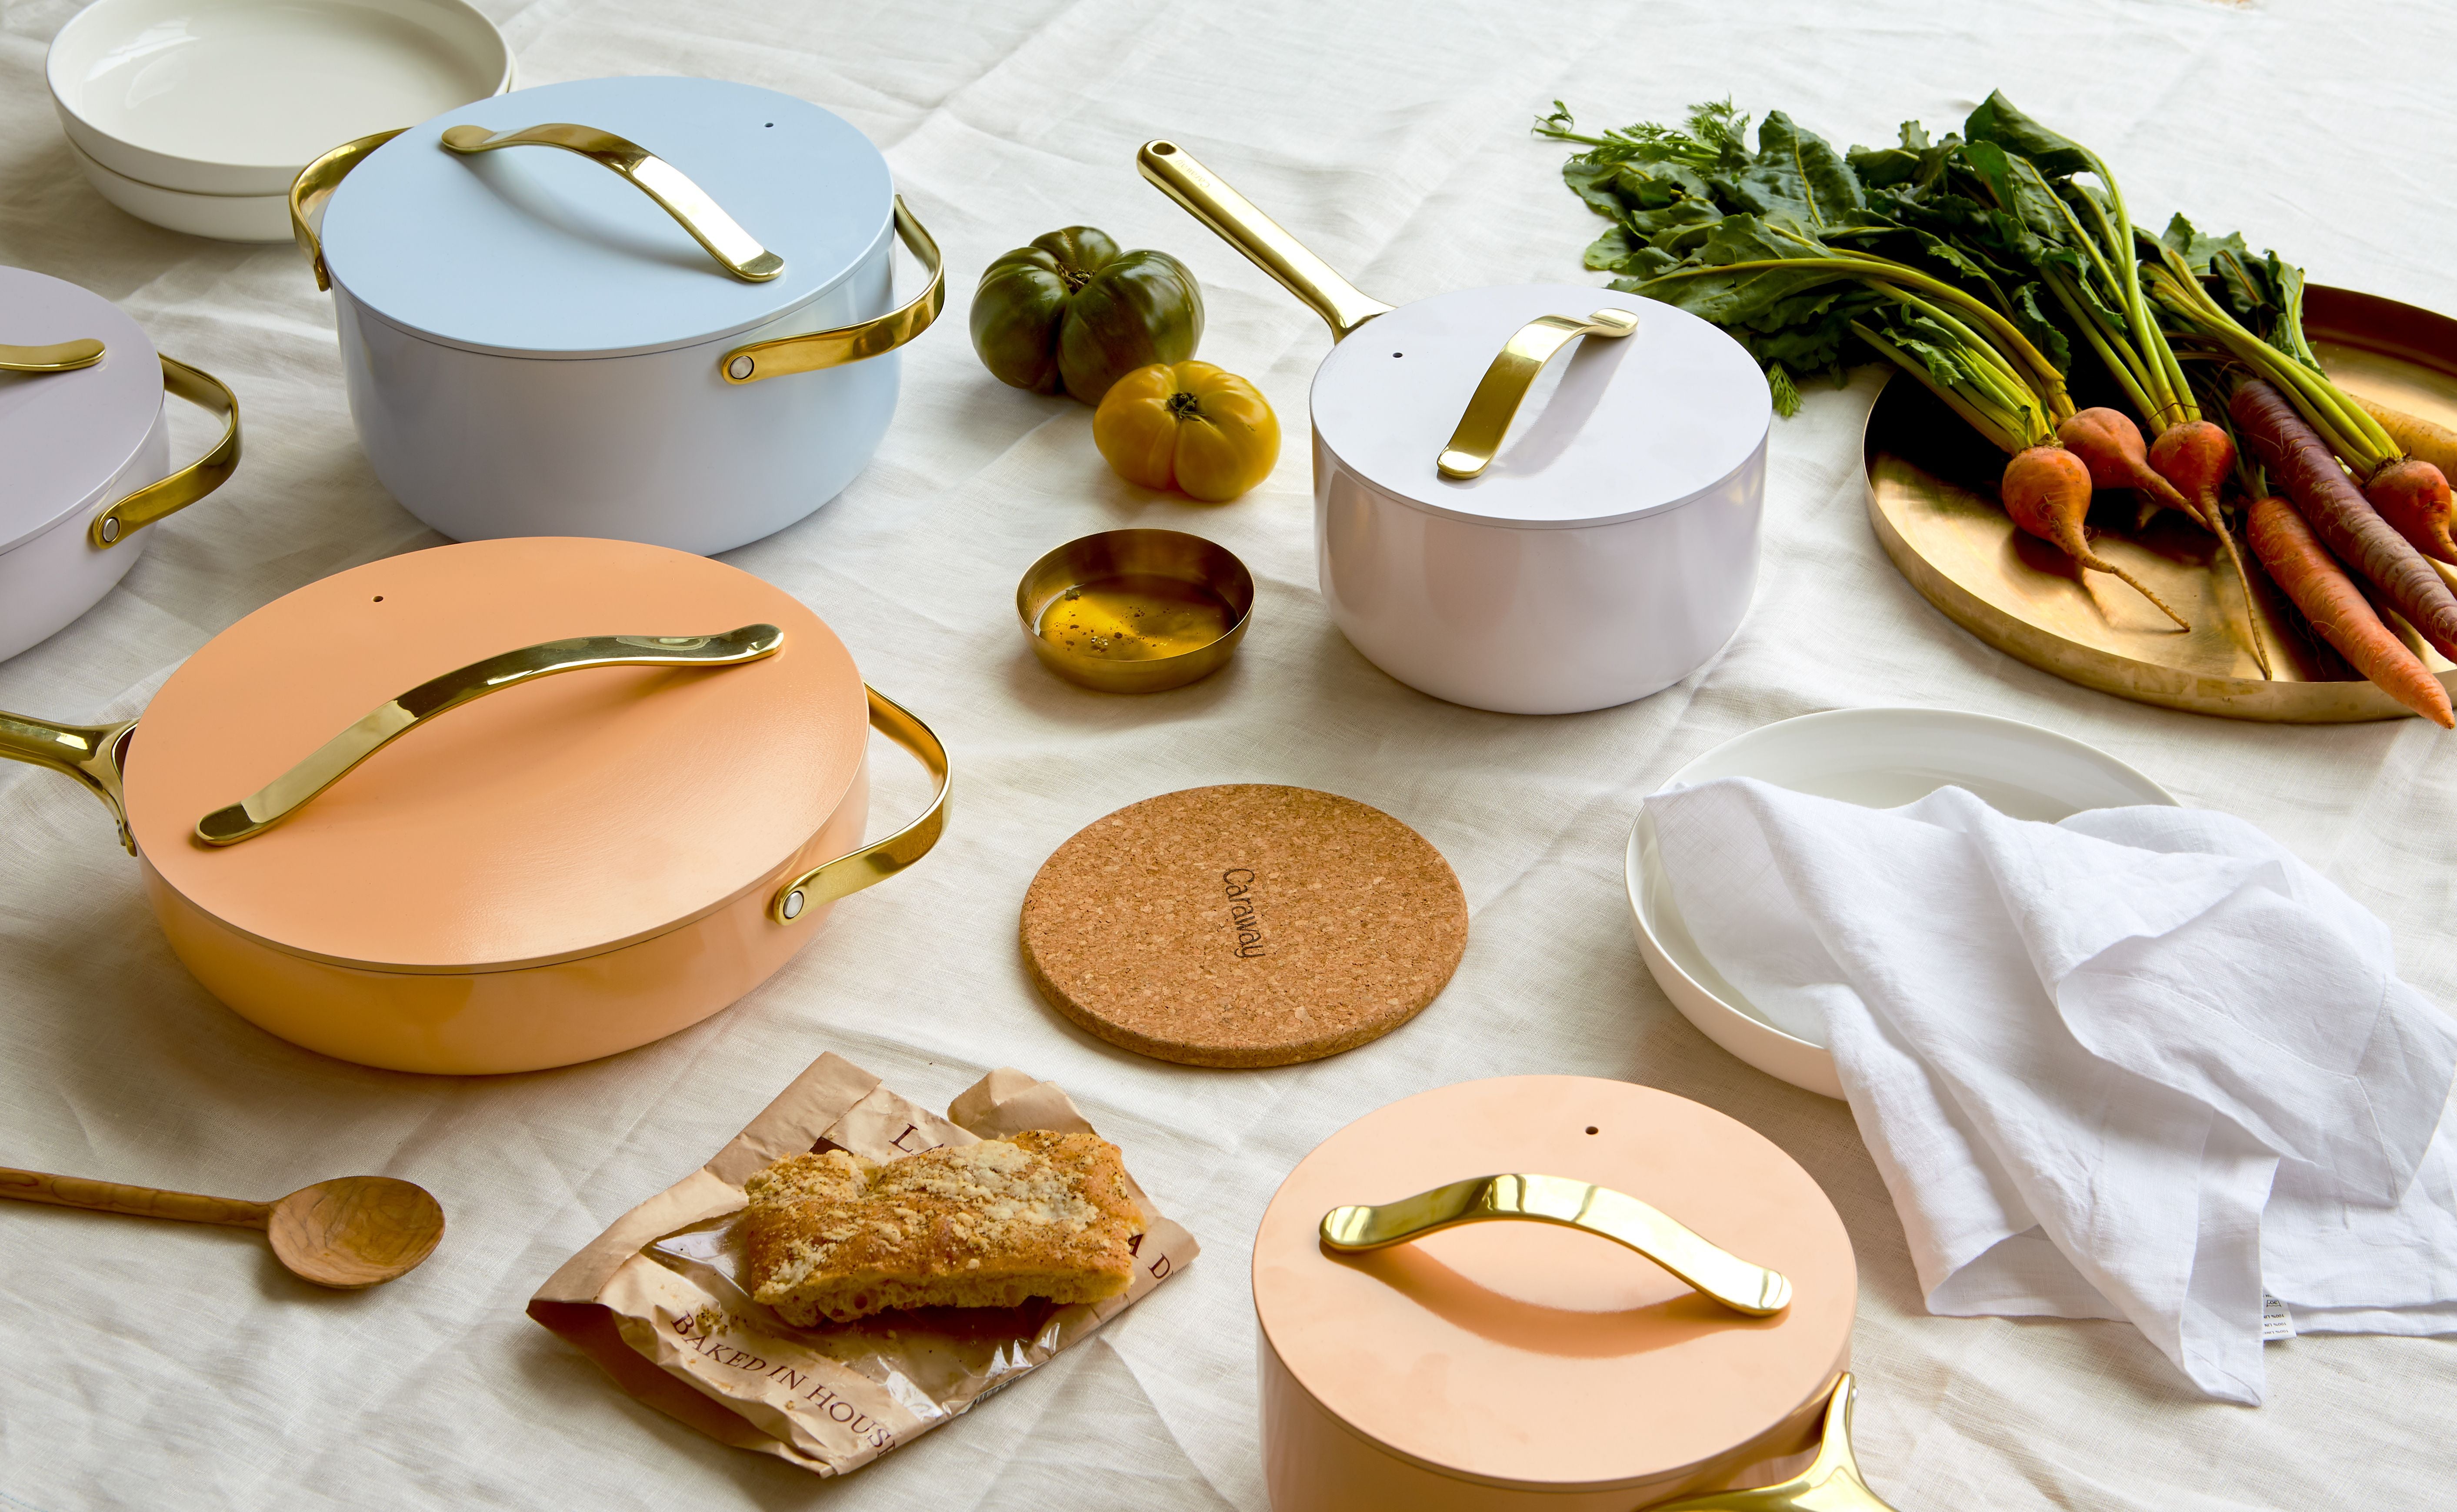 Caraway Bakeware Review: Is This Trendy Ovenware Worth the Hype?